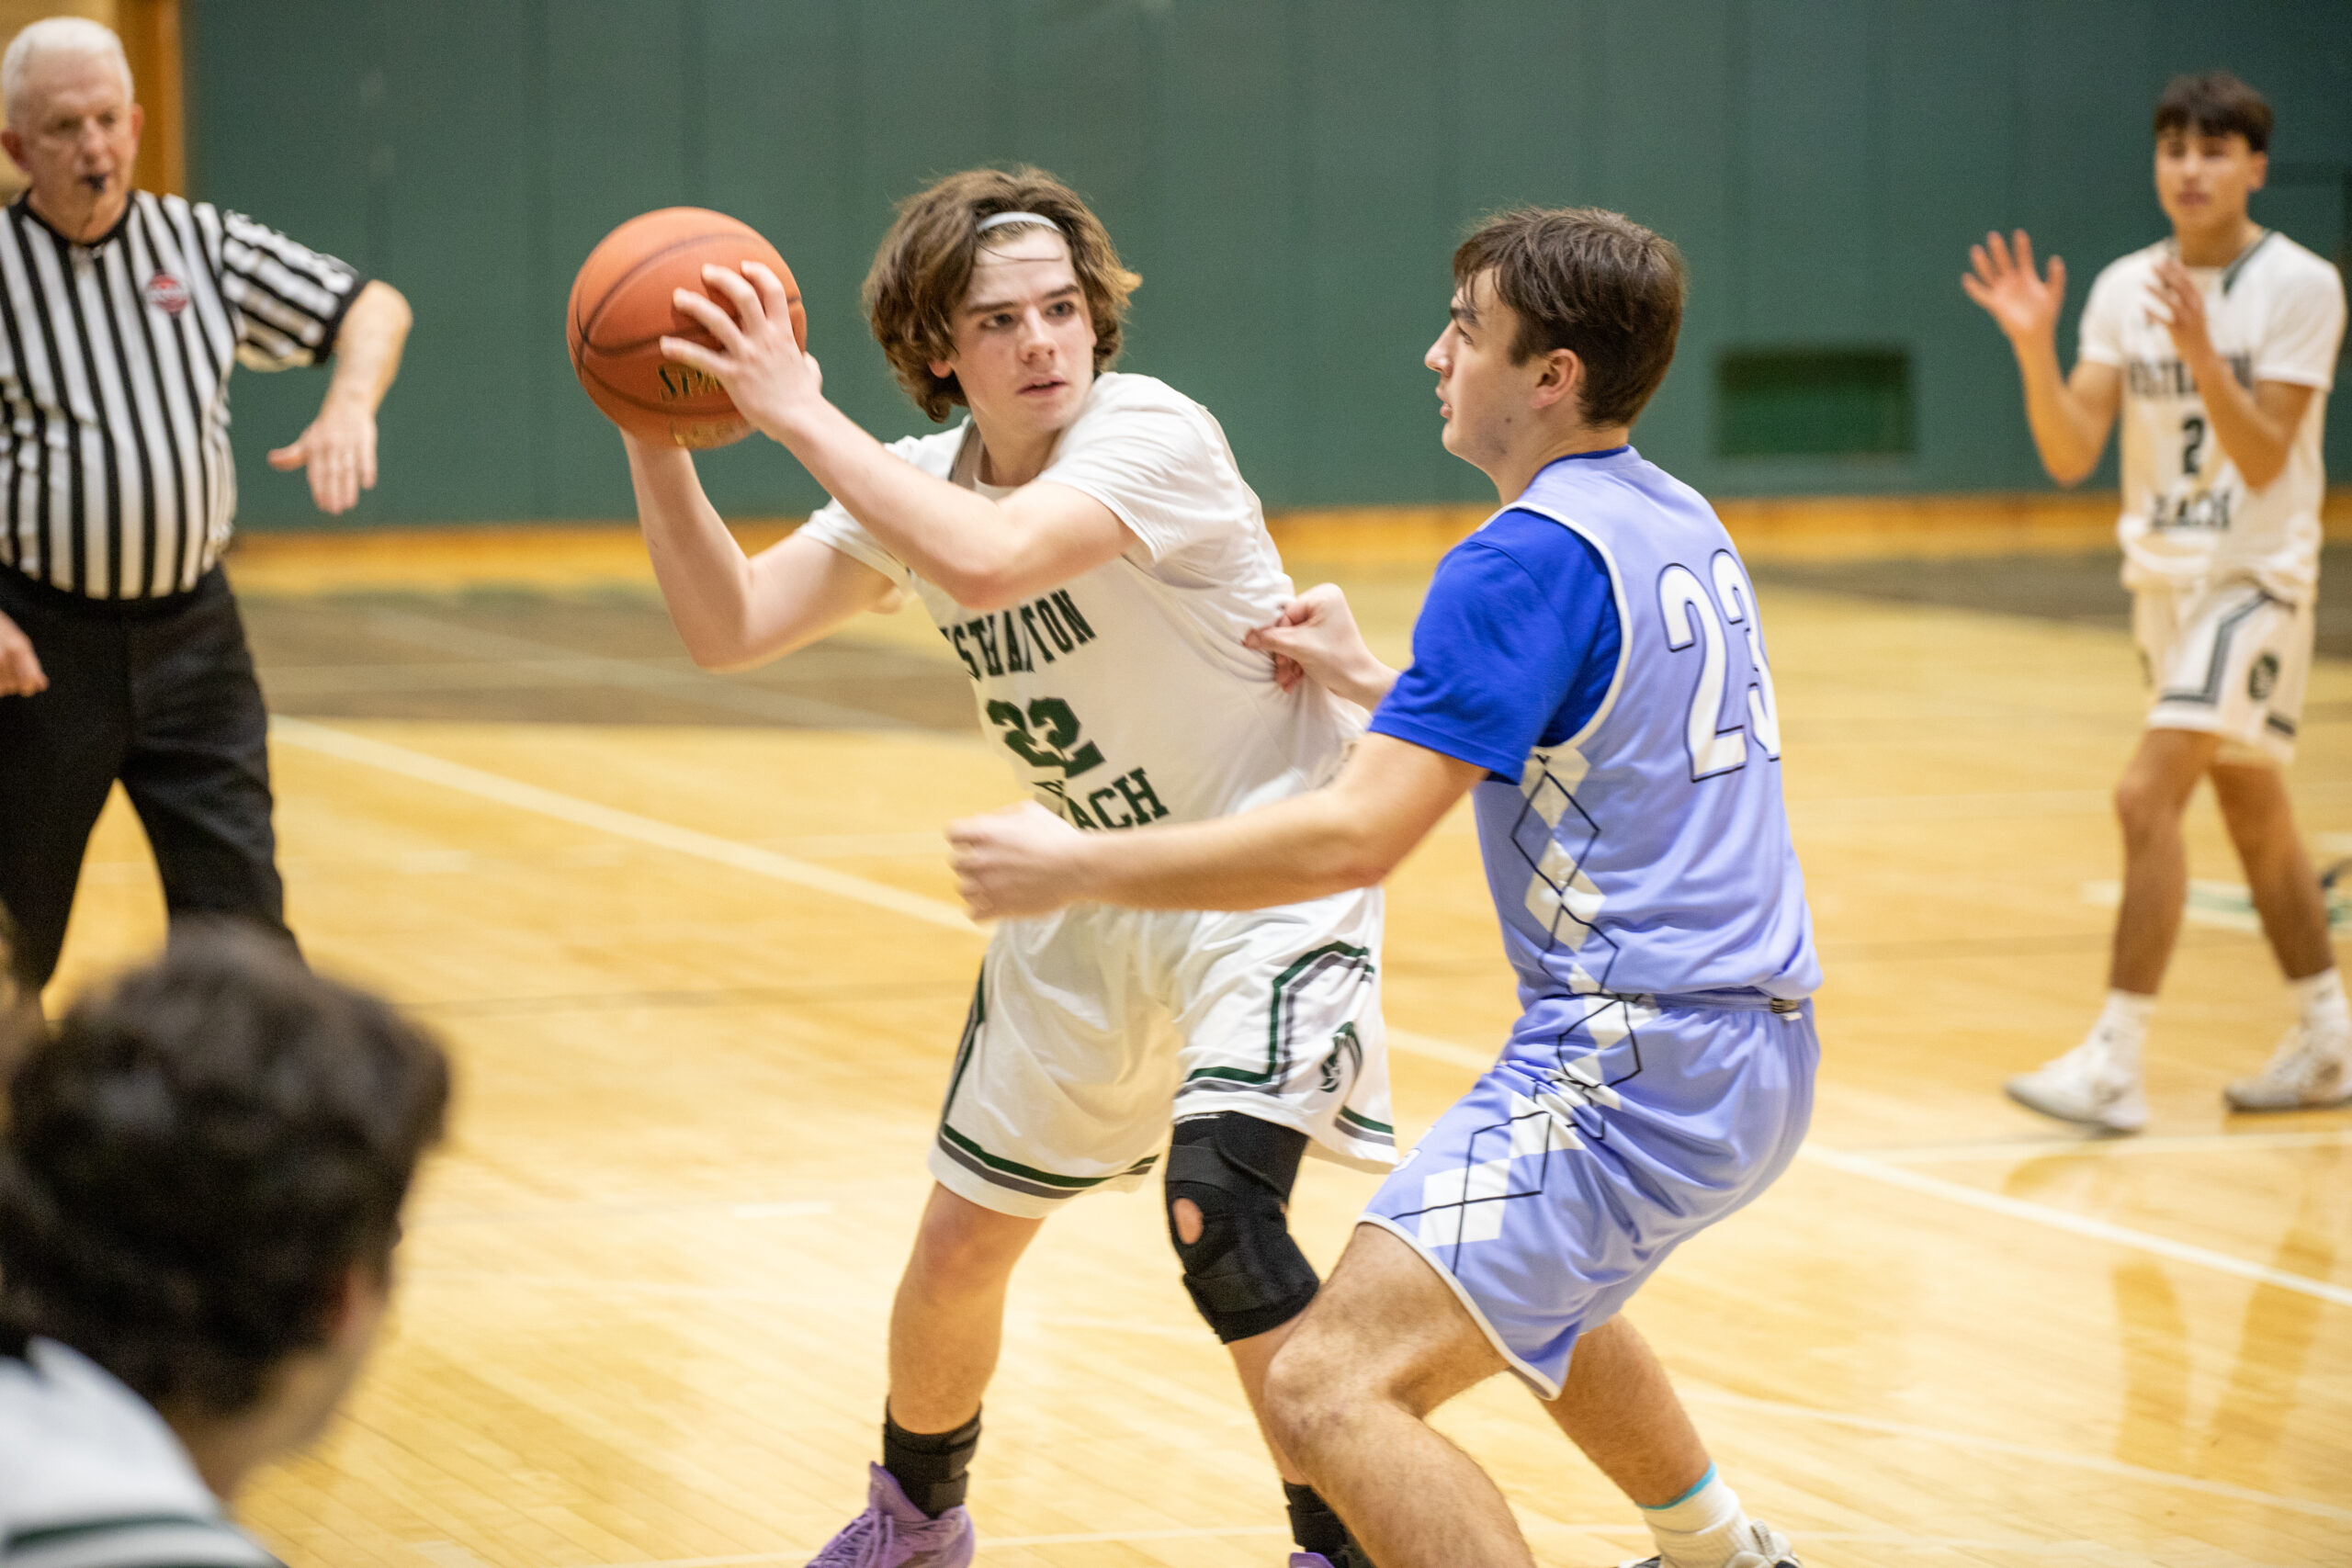 Westhampton Beach freshman Truman Hahn played in his first varsity game against Rocky Point on January 26.   MICHAEL O'CONNOR